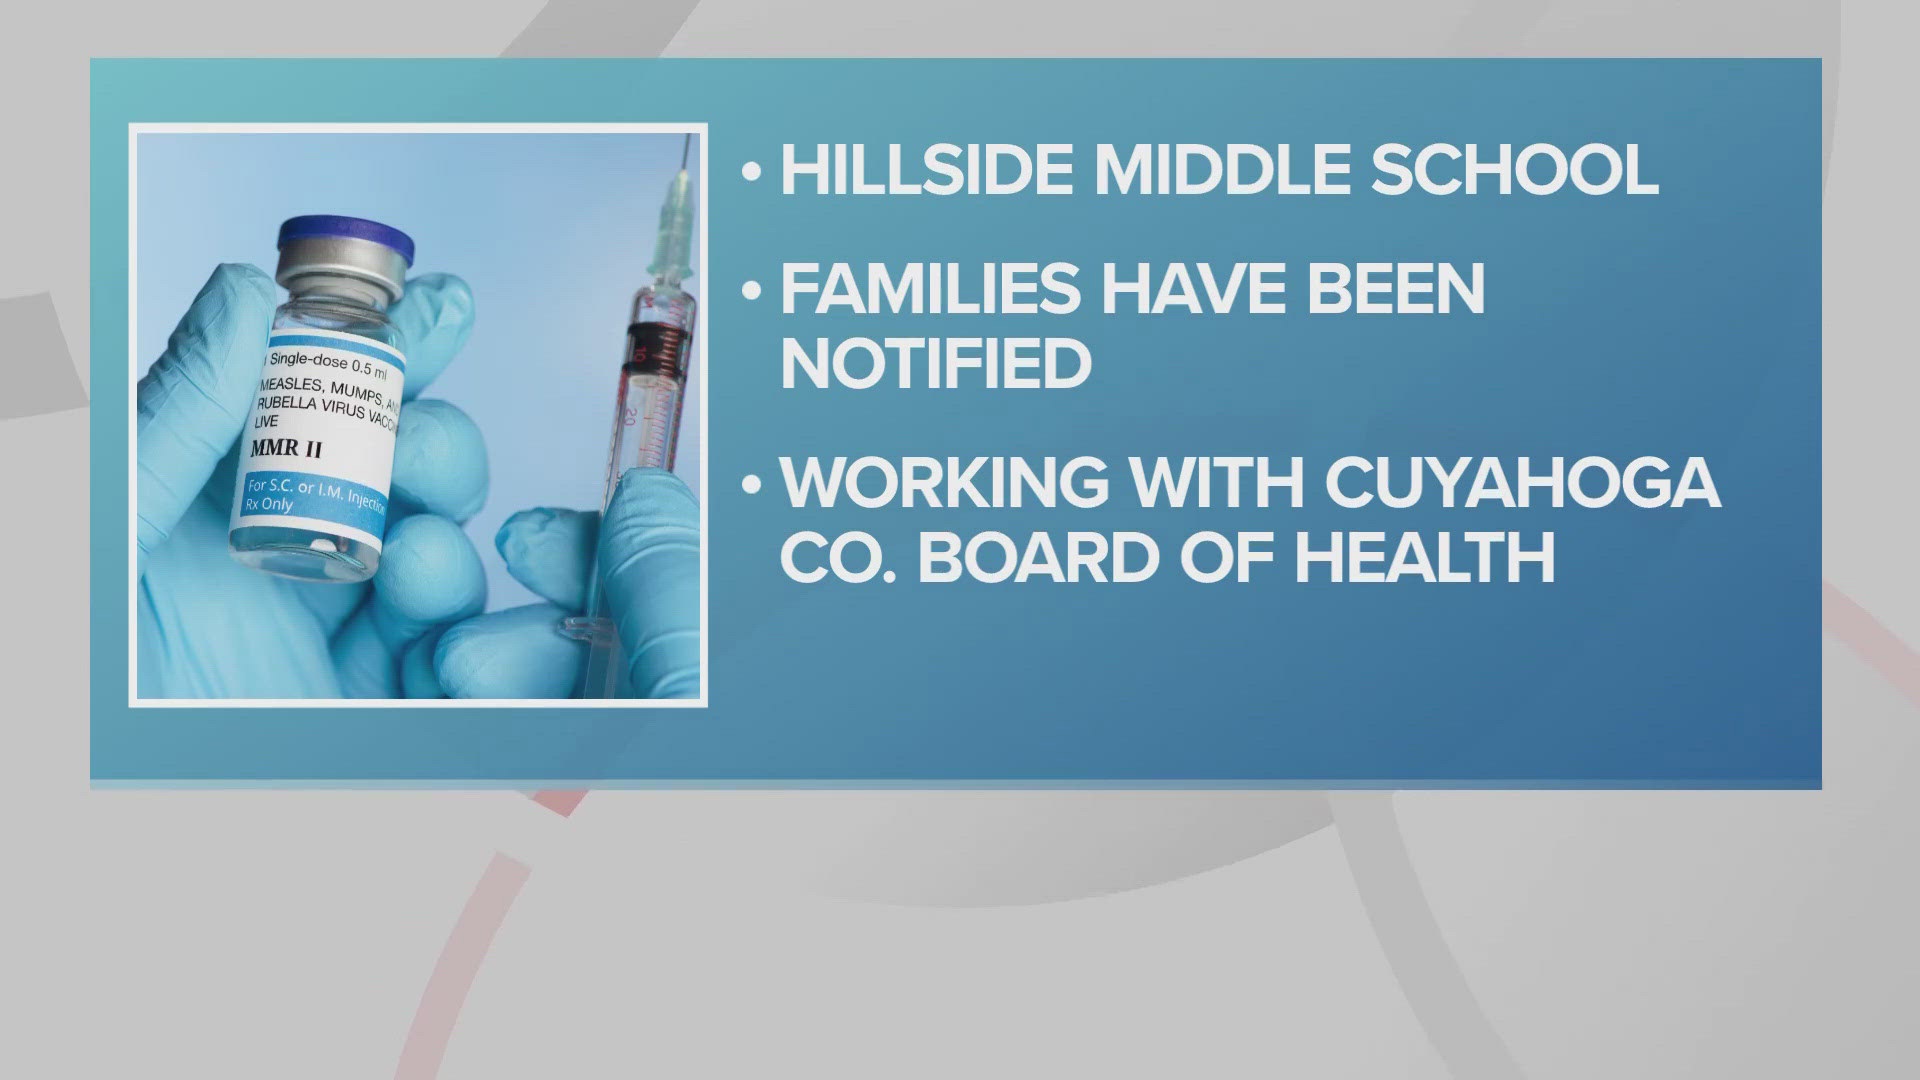 According to Parma Superintendent Charles Smialek, a seventh grade student at Hillside contracted the mumps.